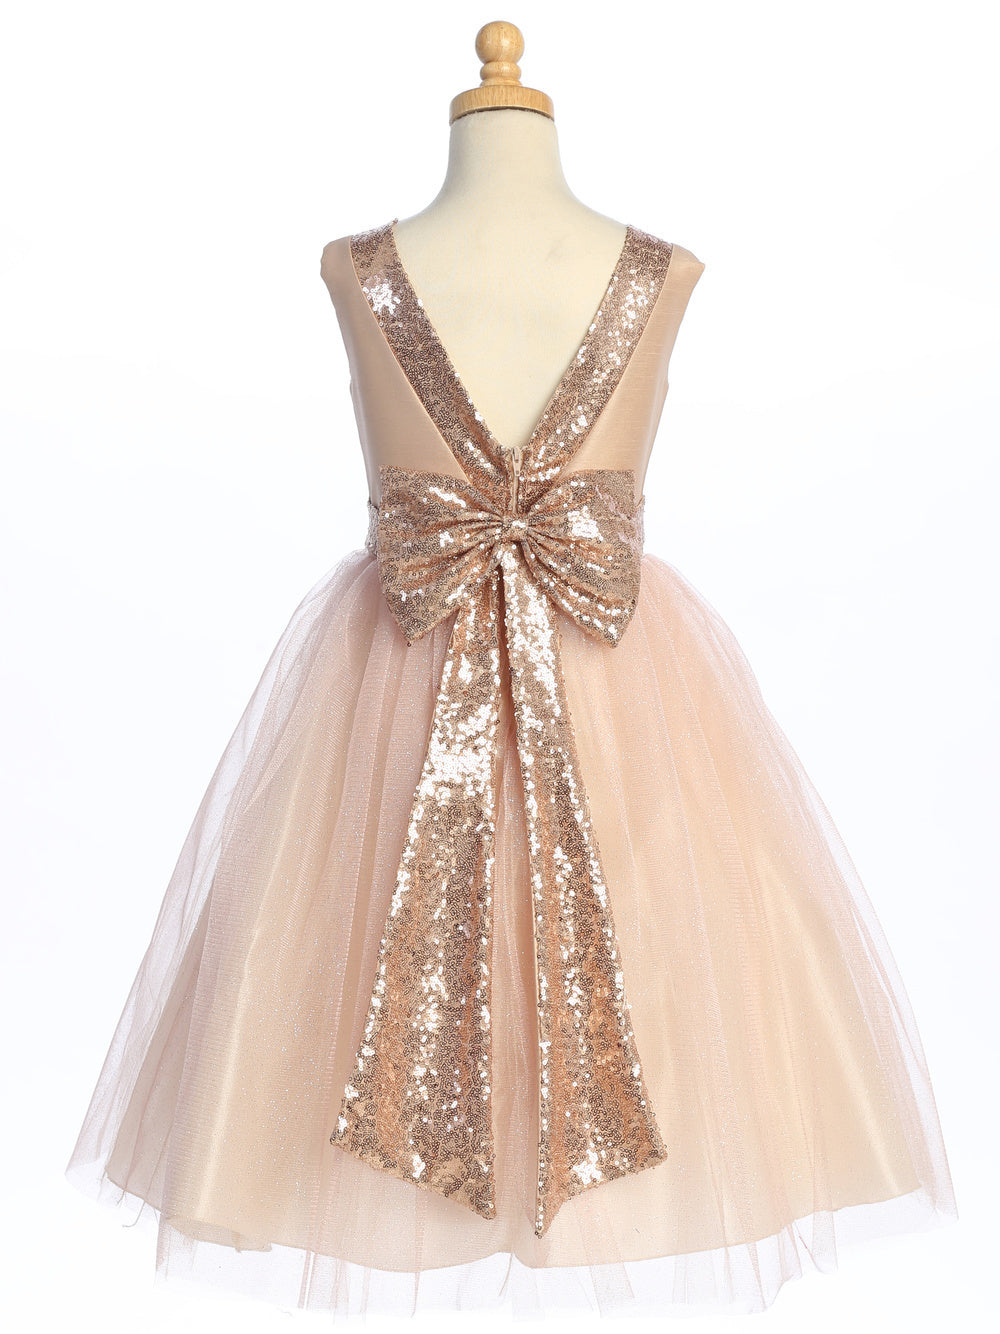 Gentle blush, flower girl adorned in shantung dress with sparkle tulle and sequins.